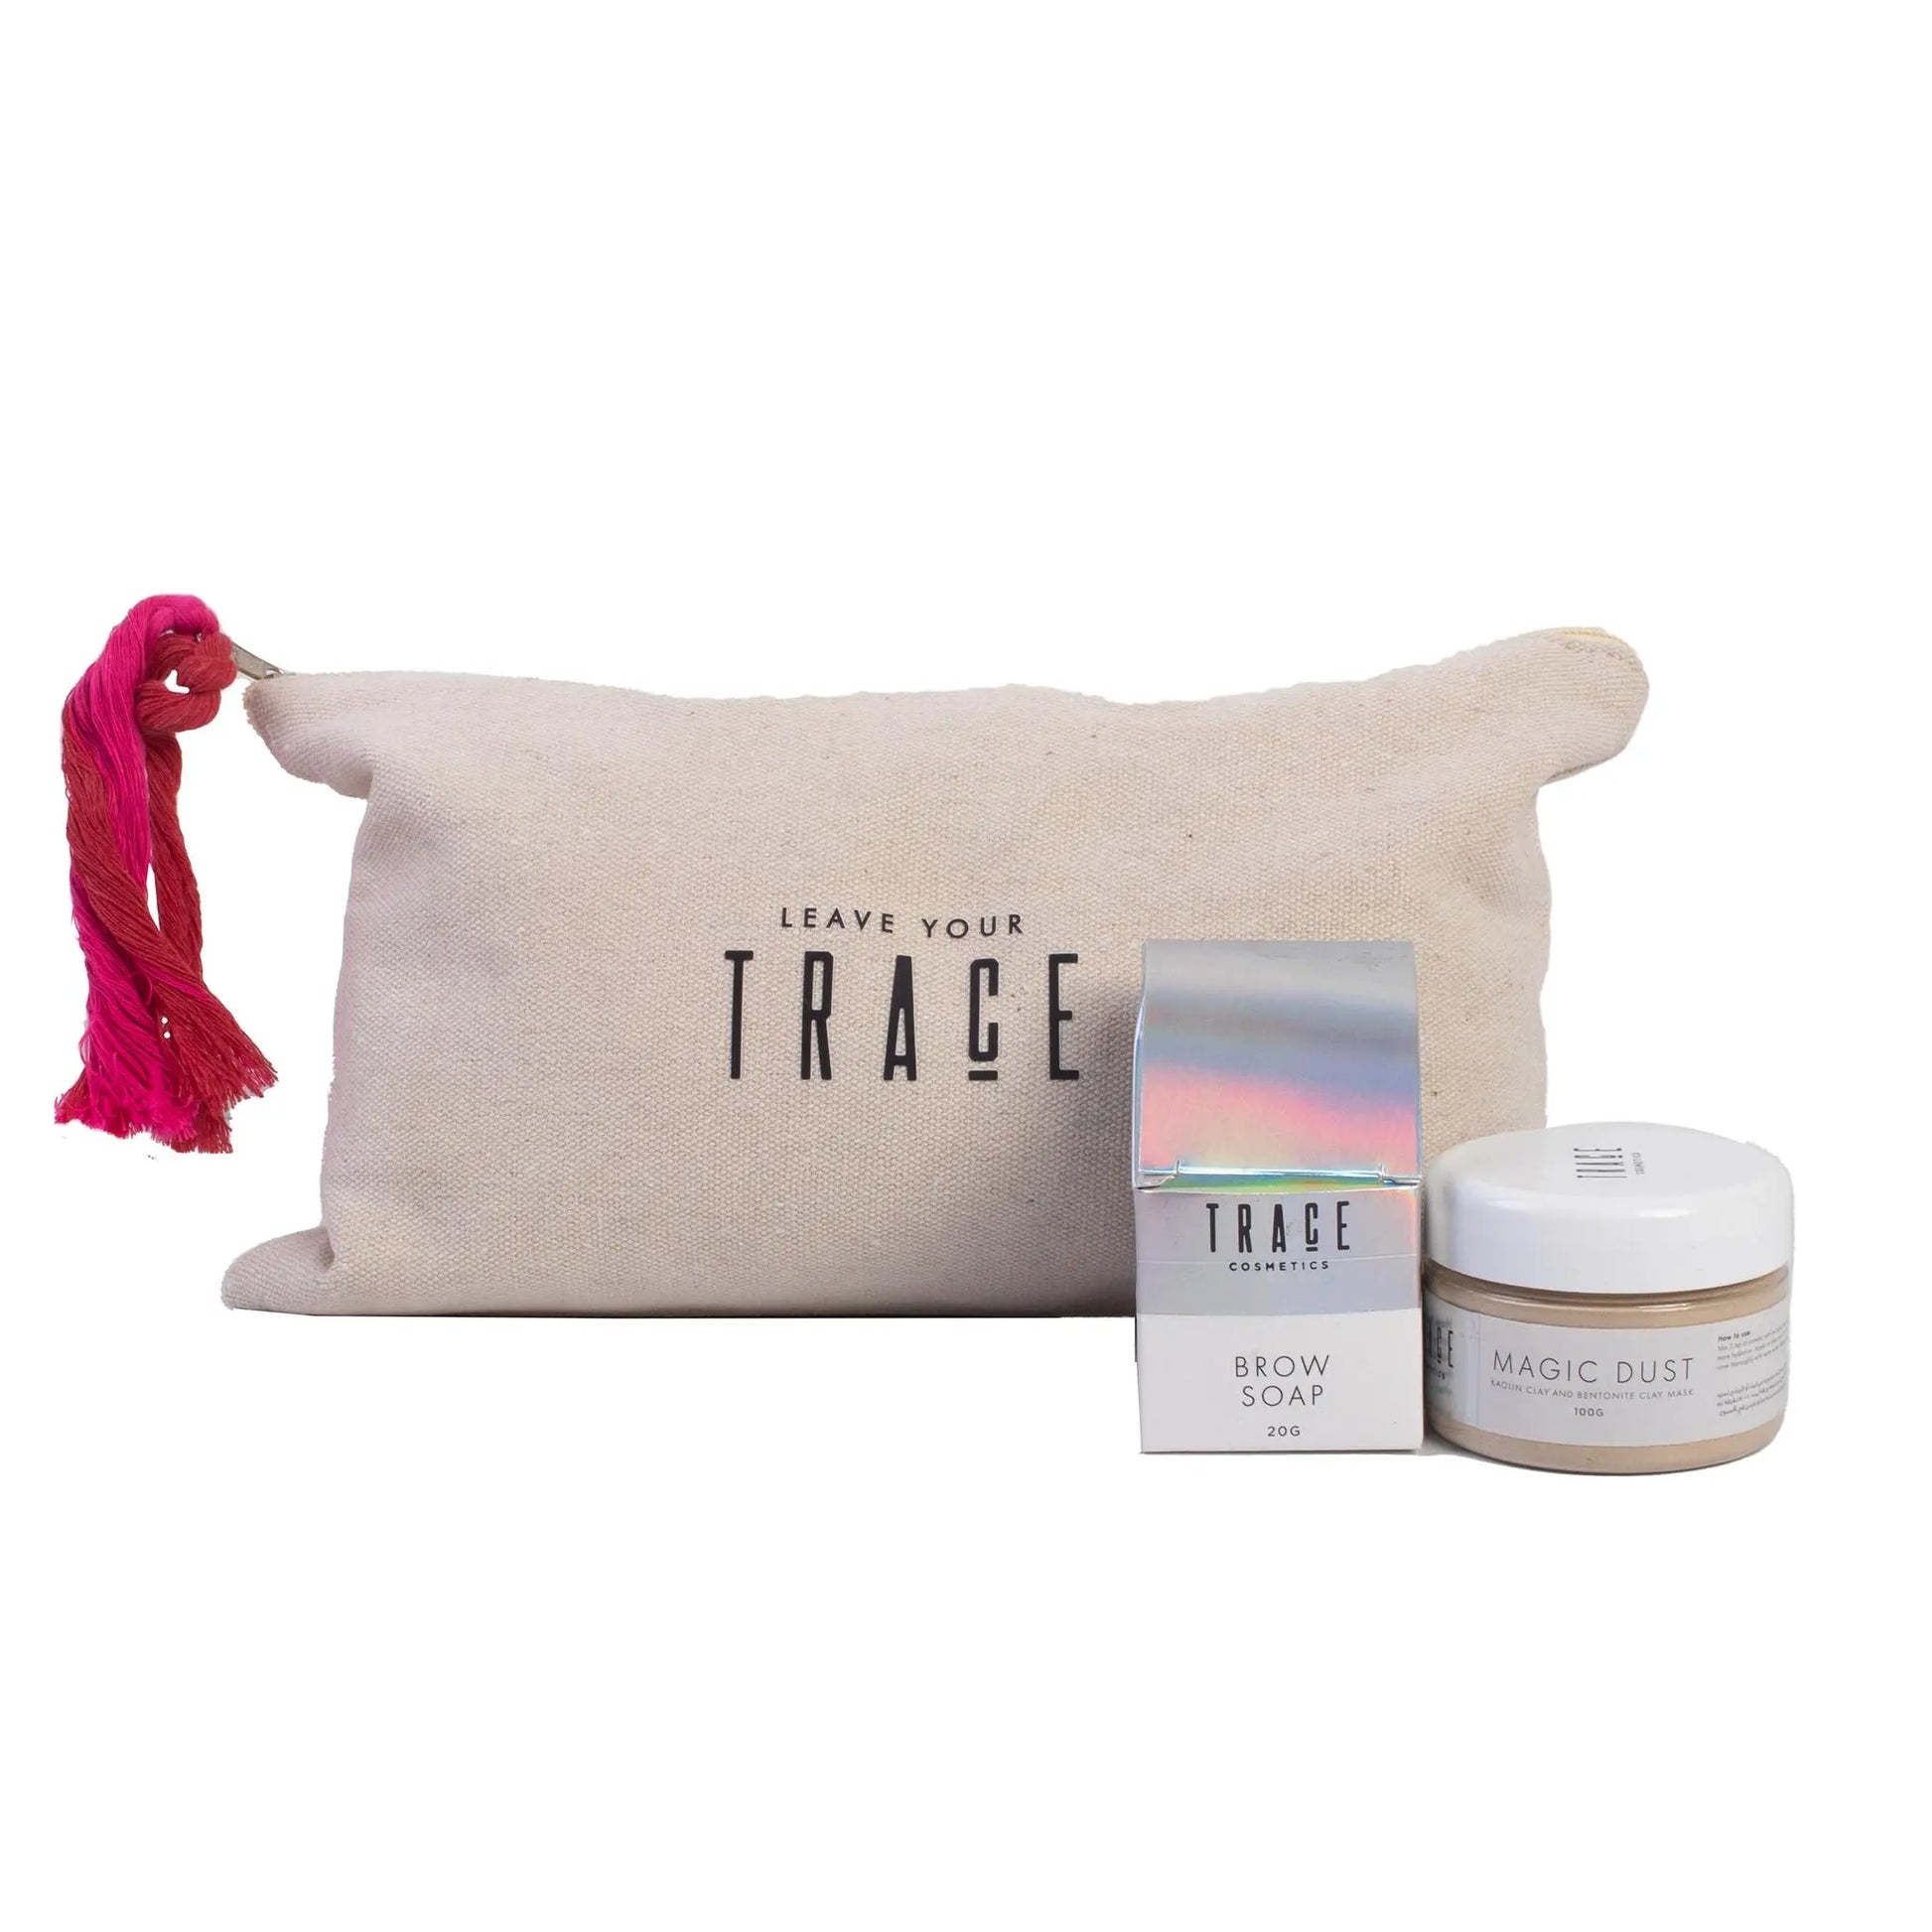 Magic Dust Mask + Brow Soap + Pouch The BoxCompany